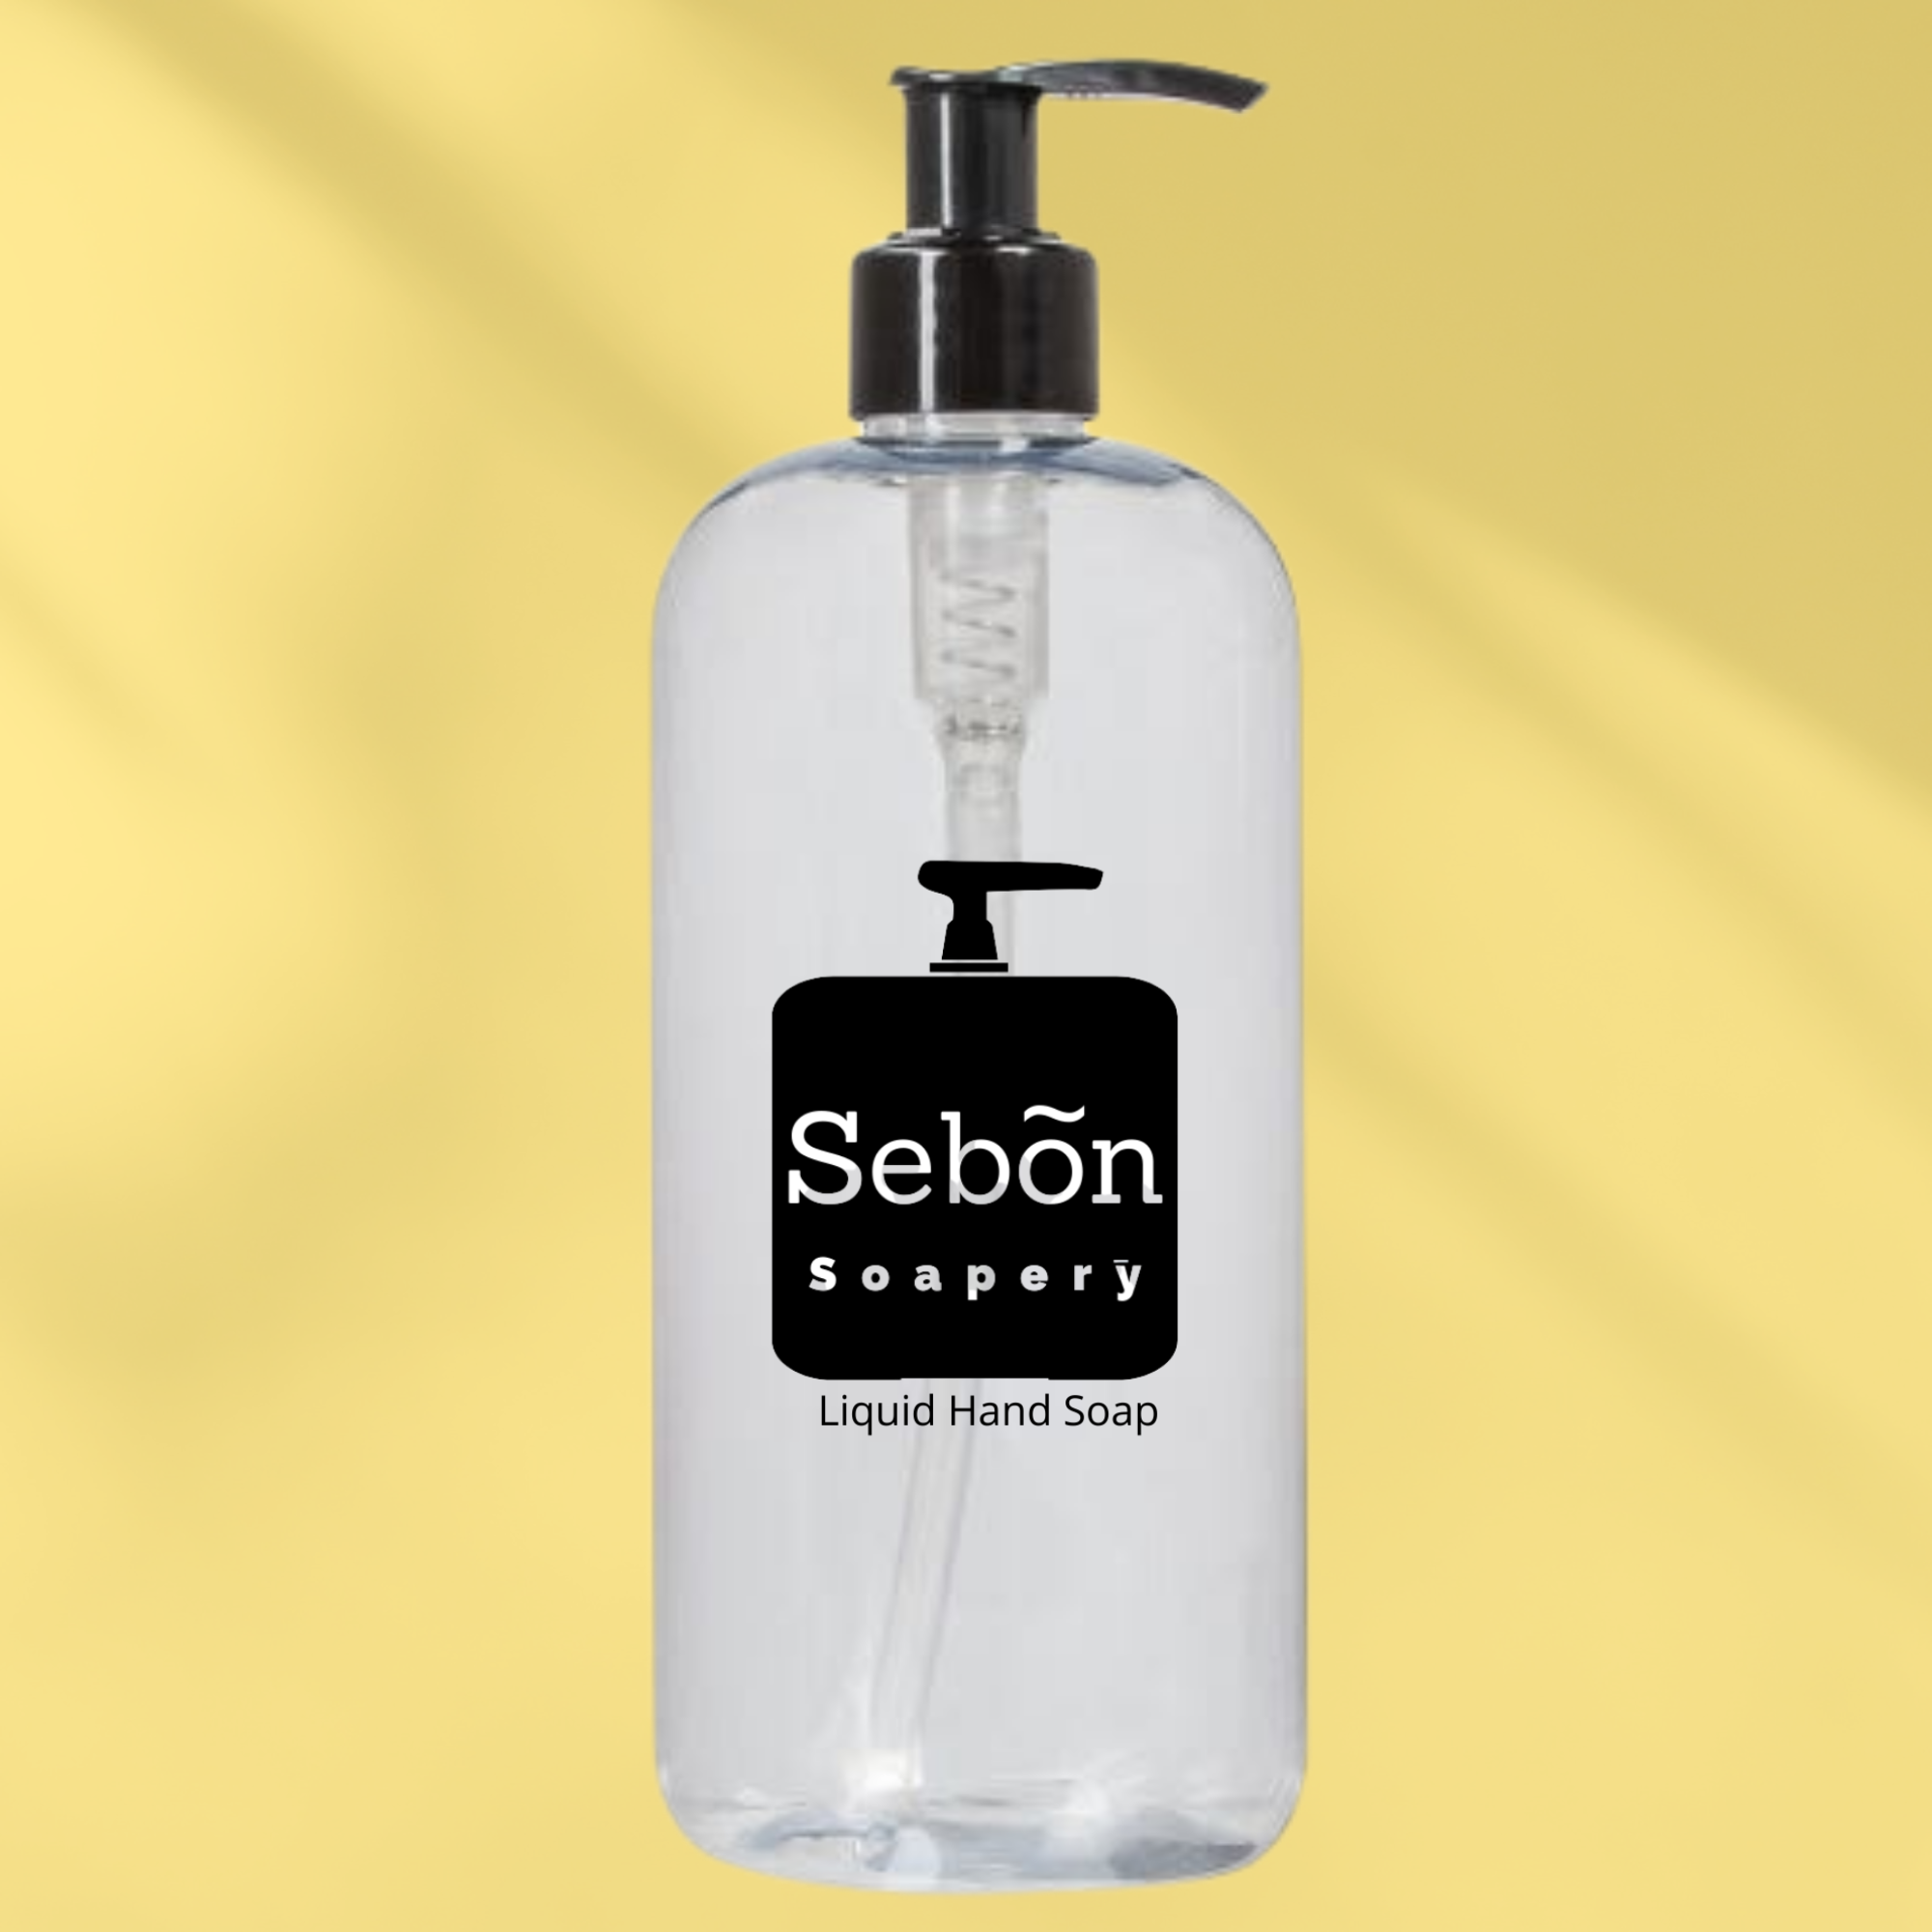 Sebon Chocolate Easter Egg Scented Liquid Hand Soap with Olive Oil